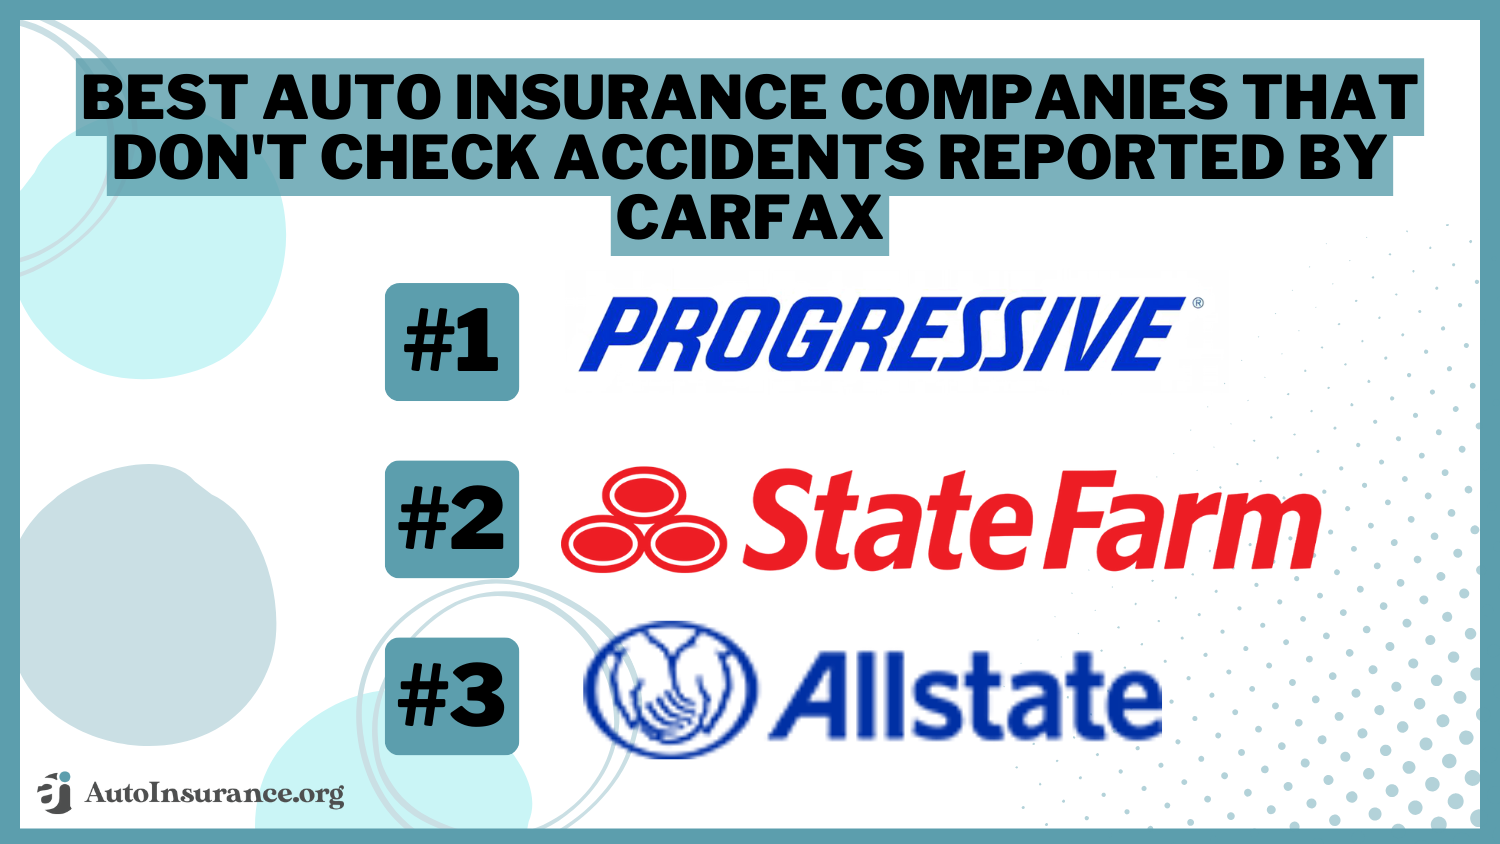 Progressive, State Farm, Allstate: Best Auto Insurance Companies That Don't Check Accidents Reported by CARFAX